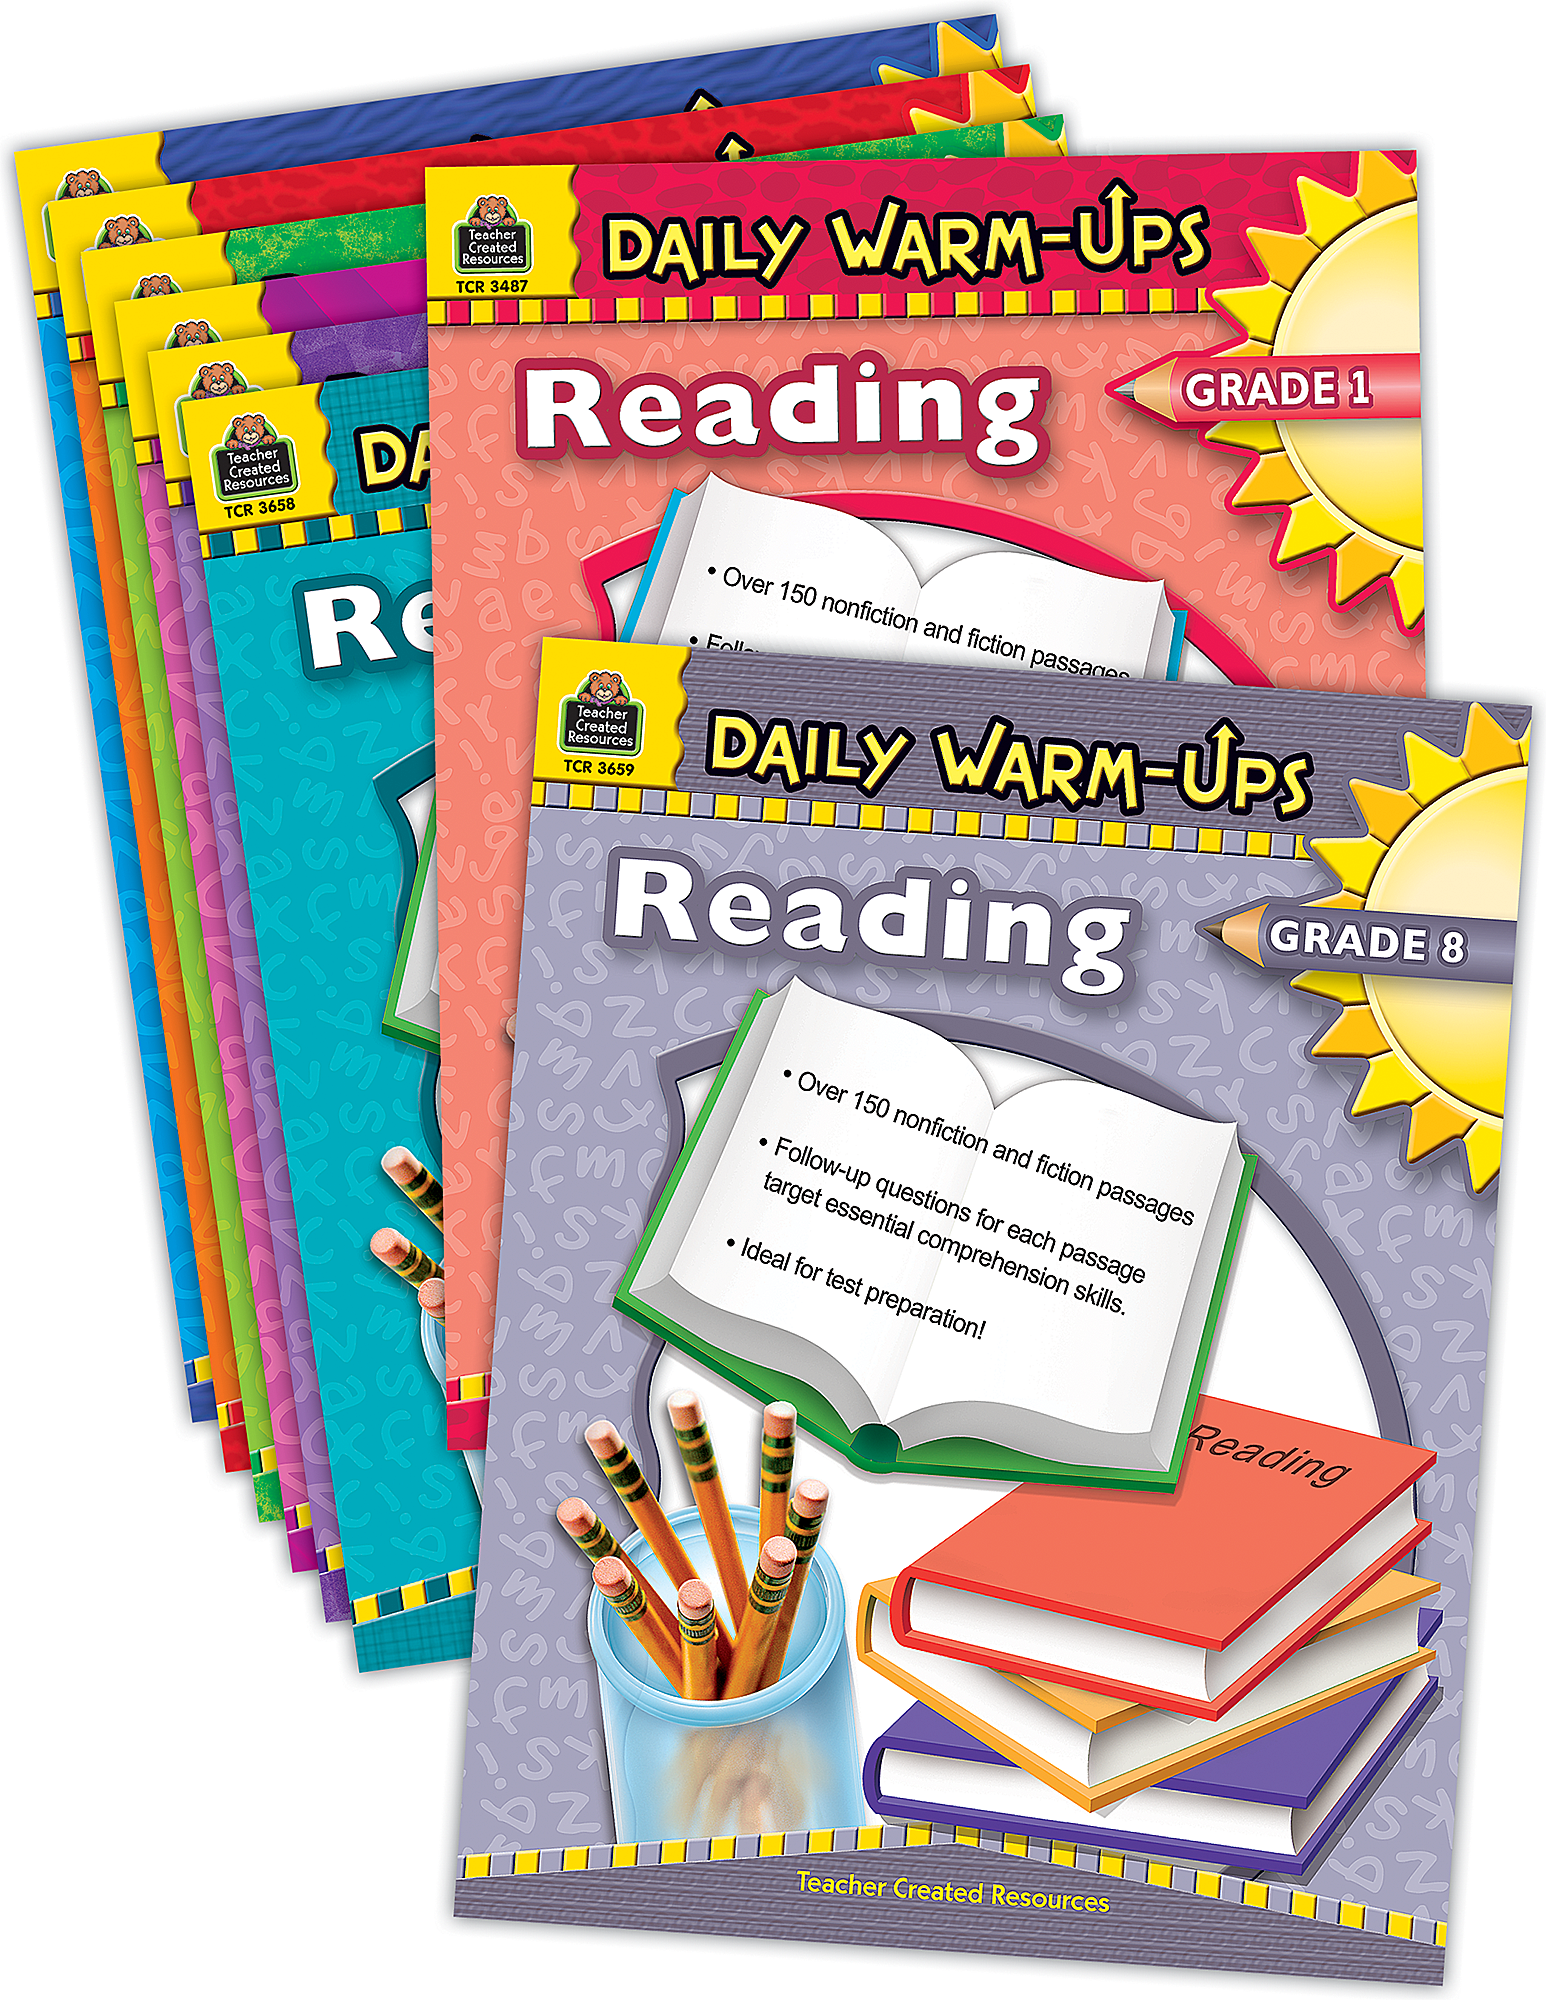 Daily WarmUps Reading Set (8 bks) TCR9623 Teacher Created Resources